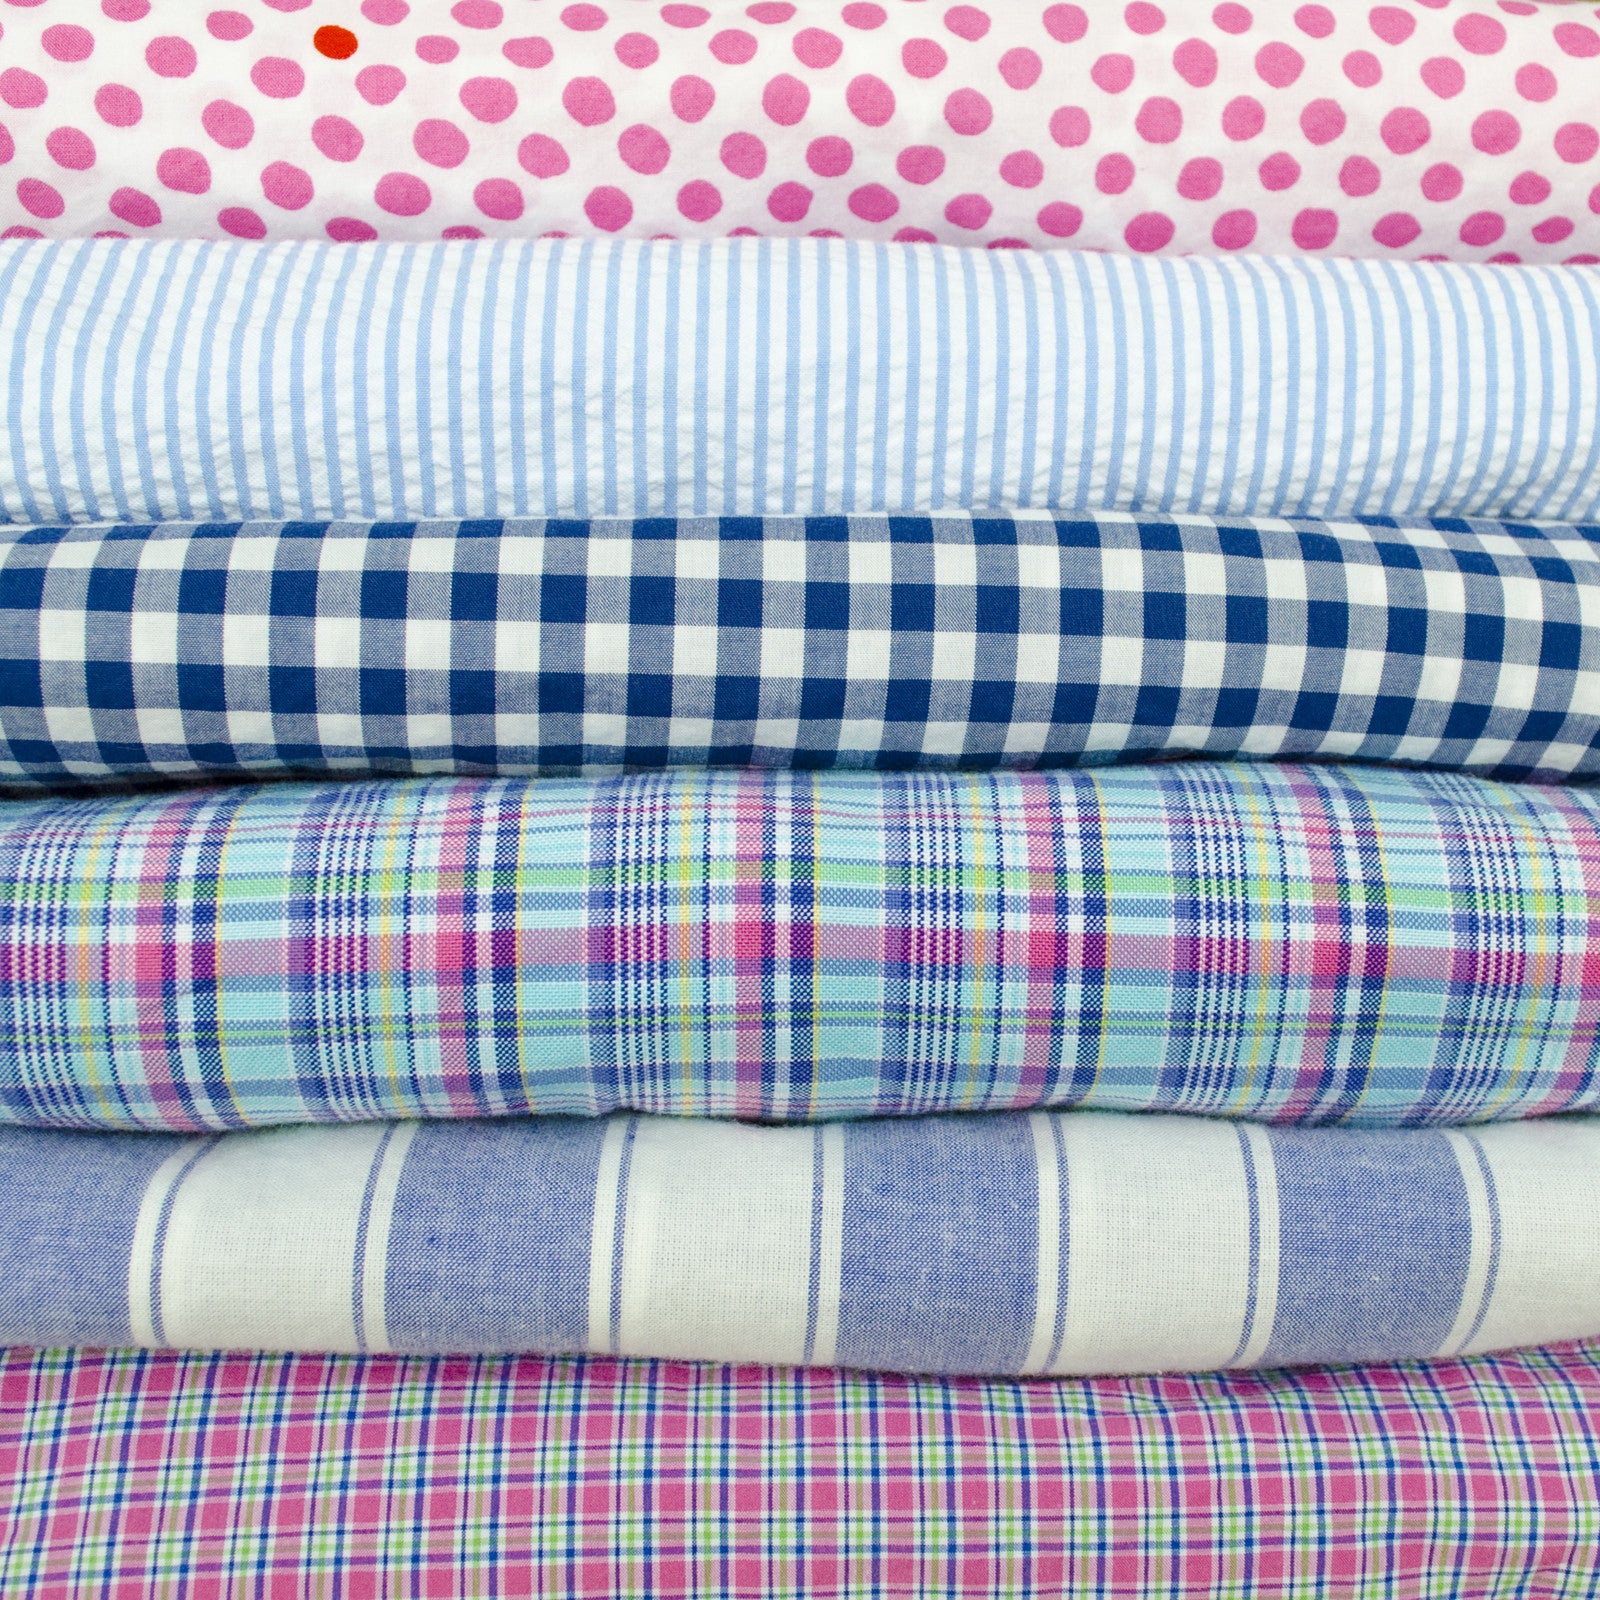 Stack of preppy shirts with plaid, gingham and polka dots